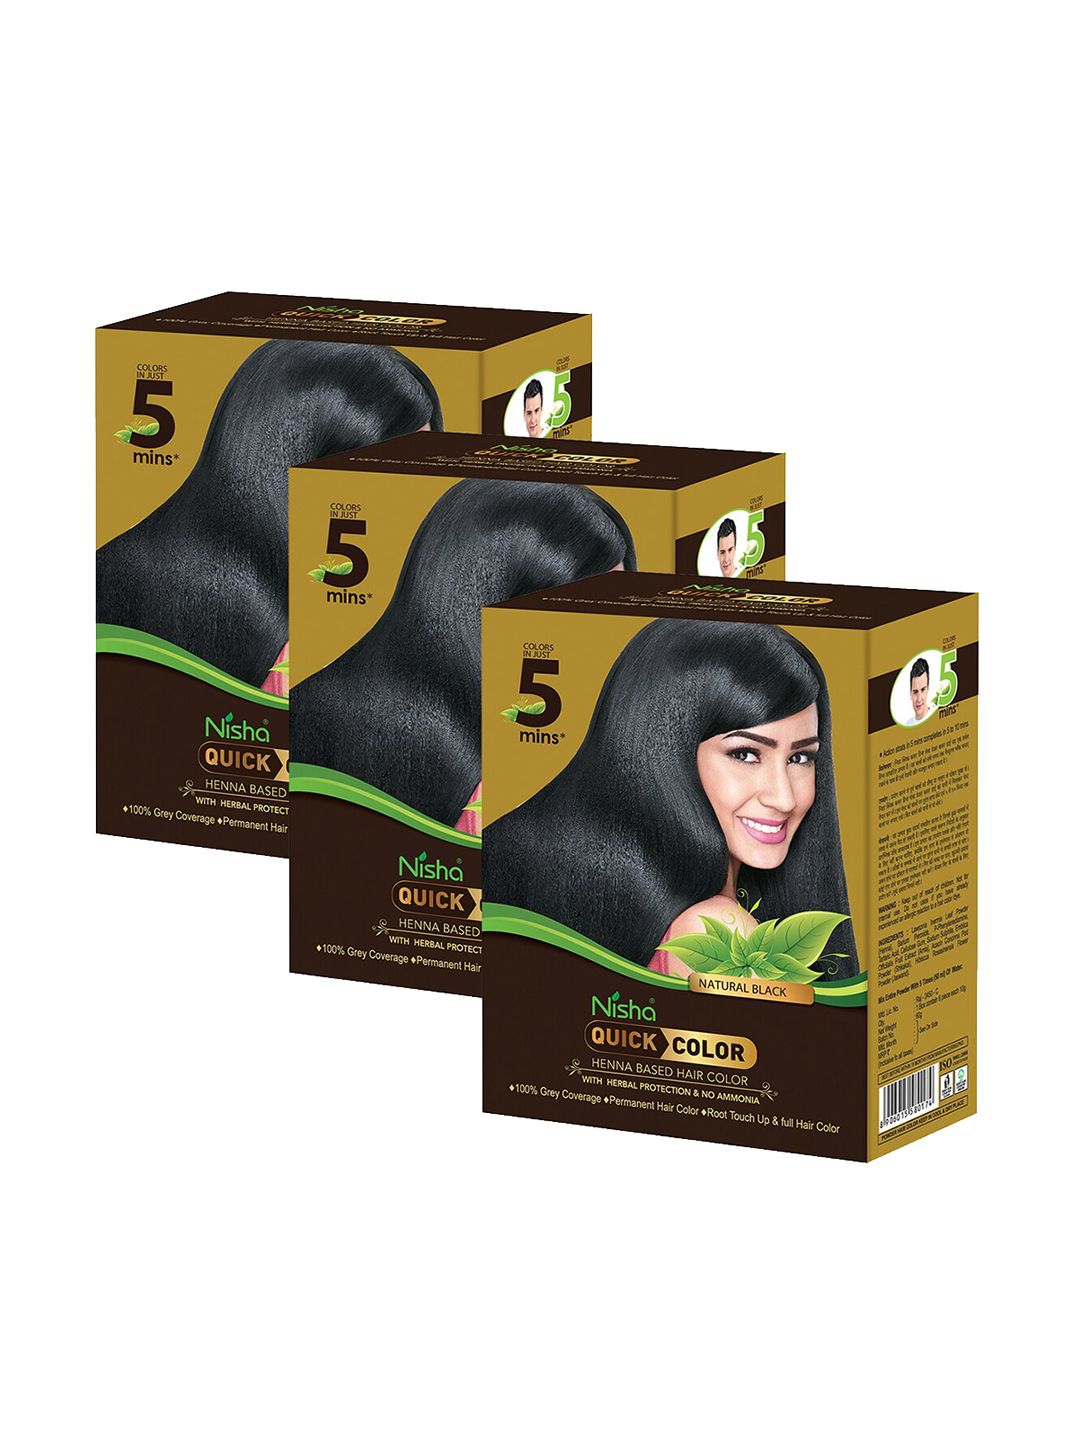 Nisha Set of 3 Quick Henna Based Hair Color 180gm - Natural Black Price in India